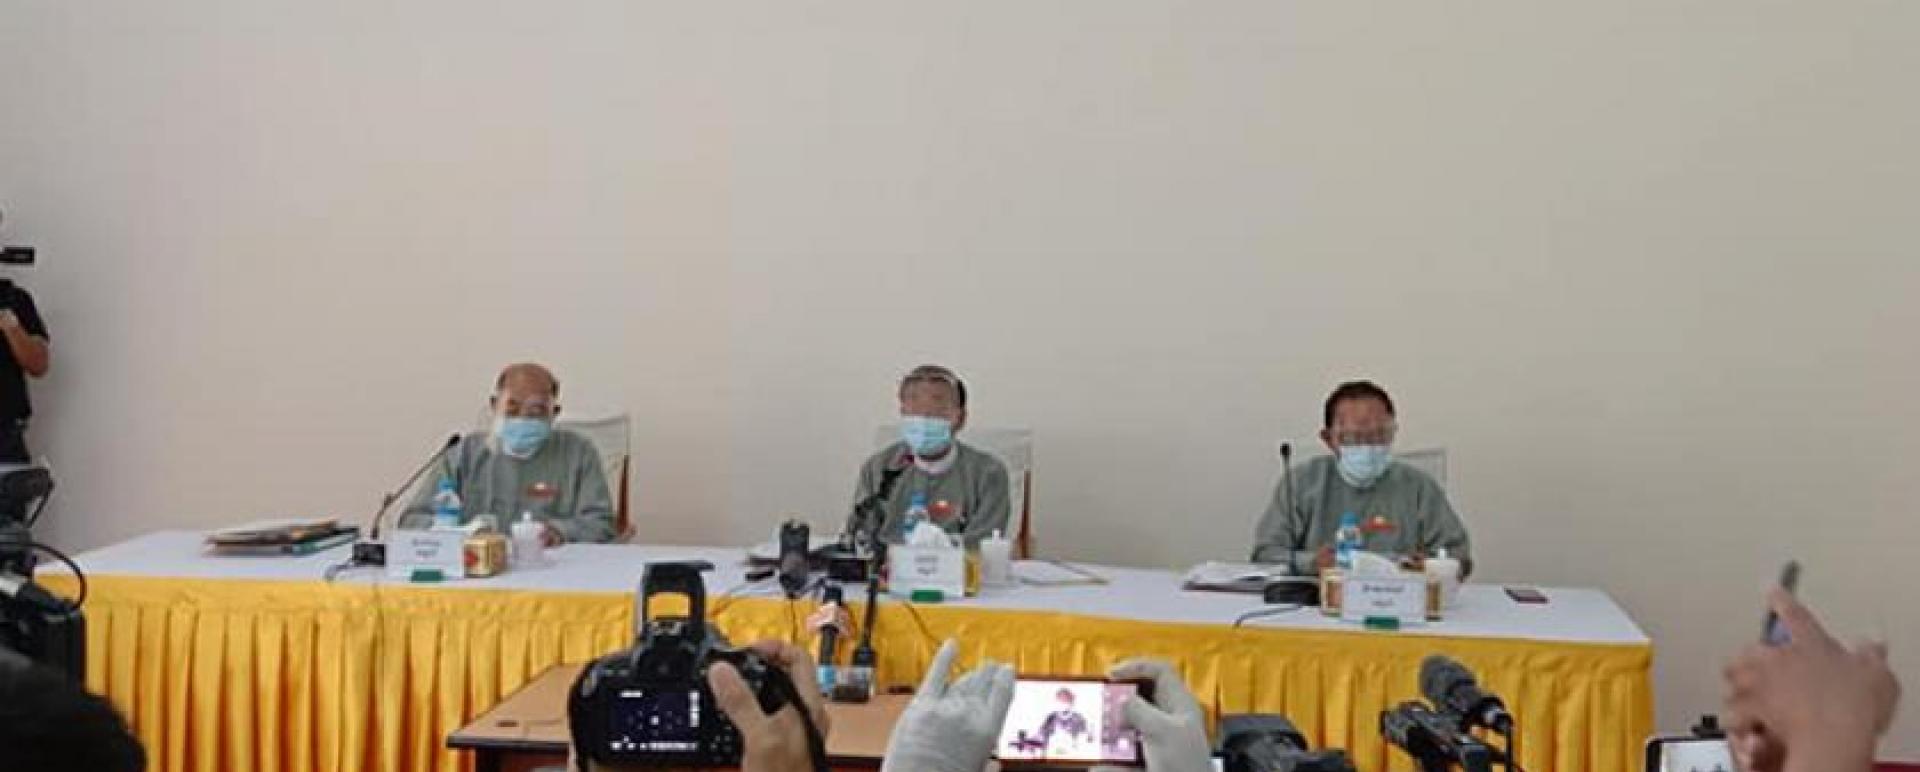 UEC holds press release on electoral news in Nay Pyi Taw